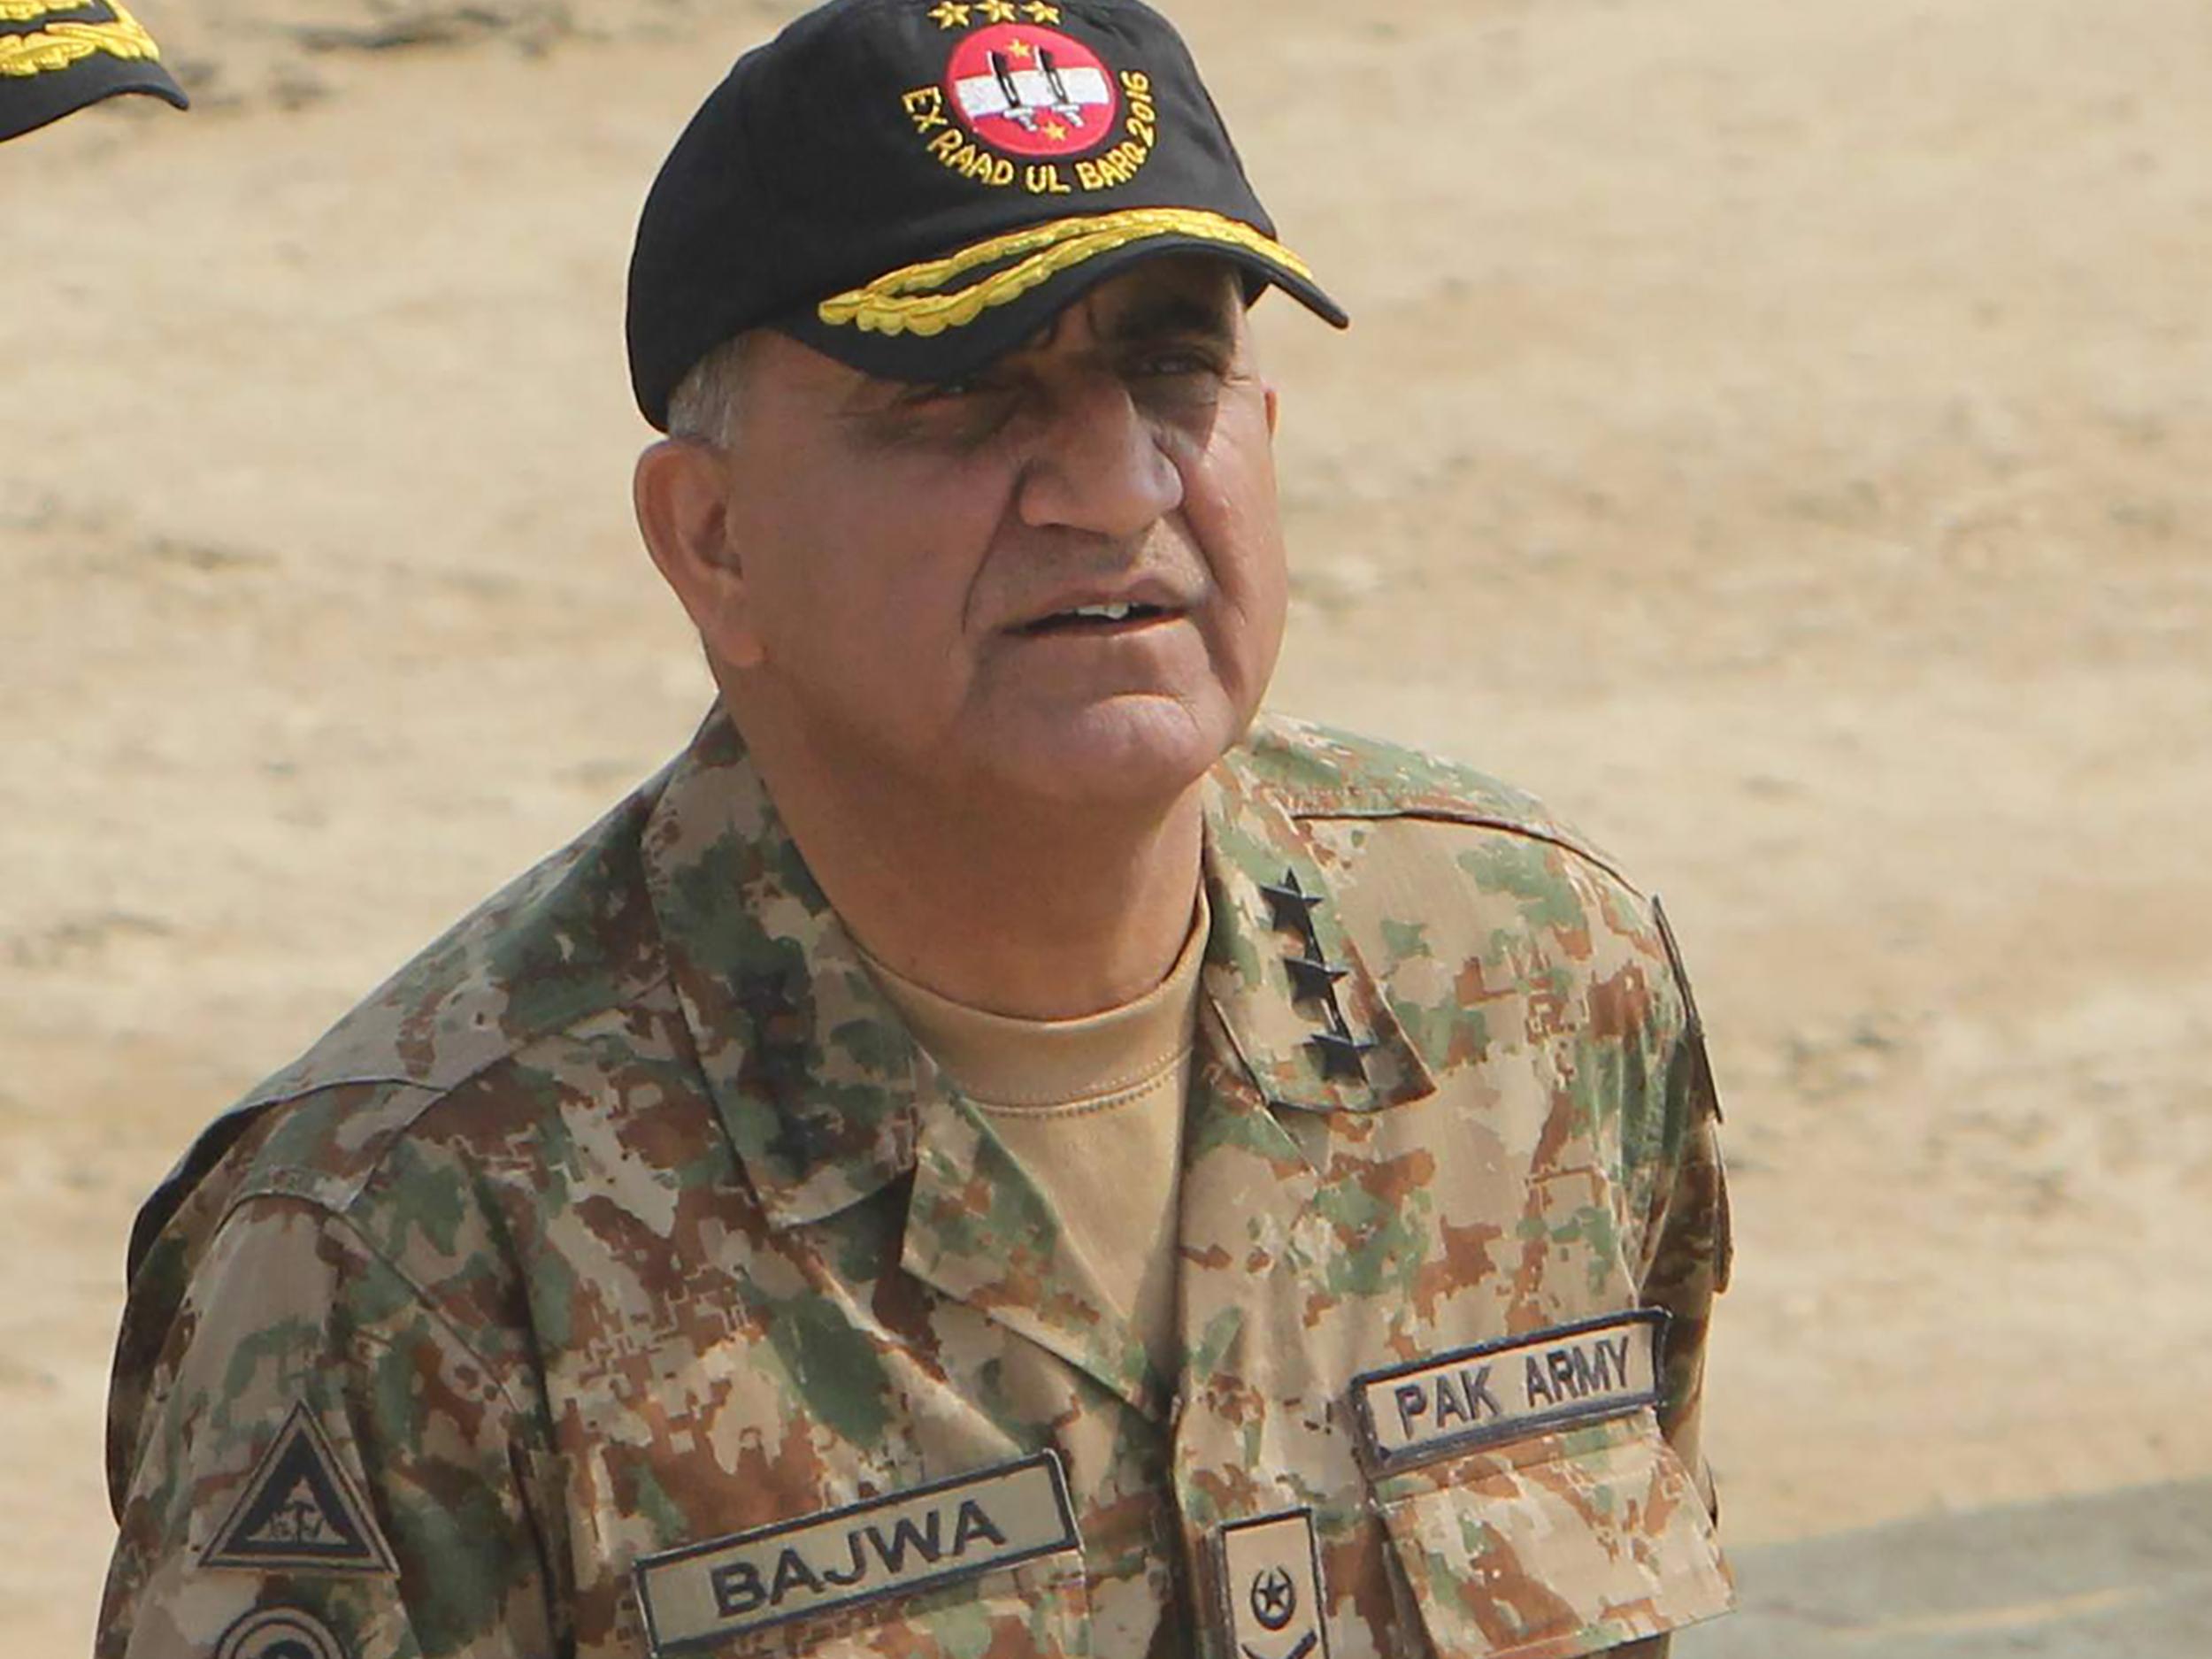 Pakistani Army General Qamar Javed Bajwa arrives to attend a military exercise on the Indian border in November 2016